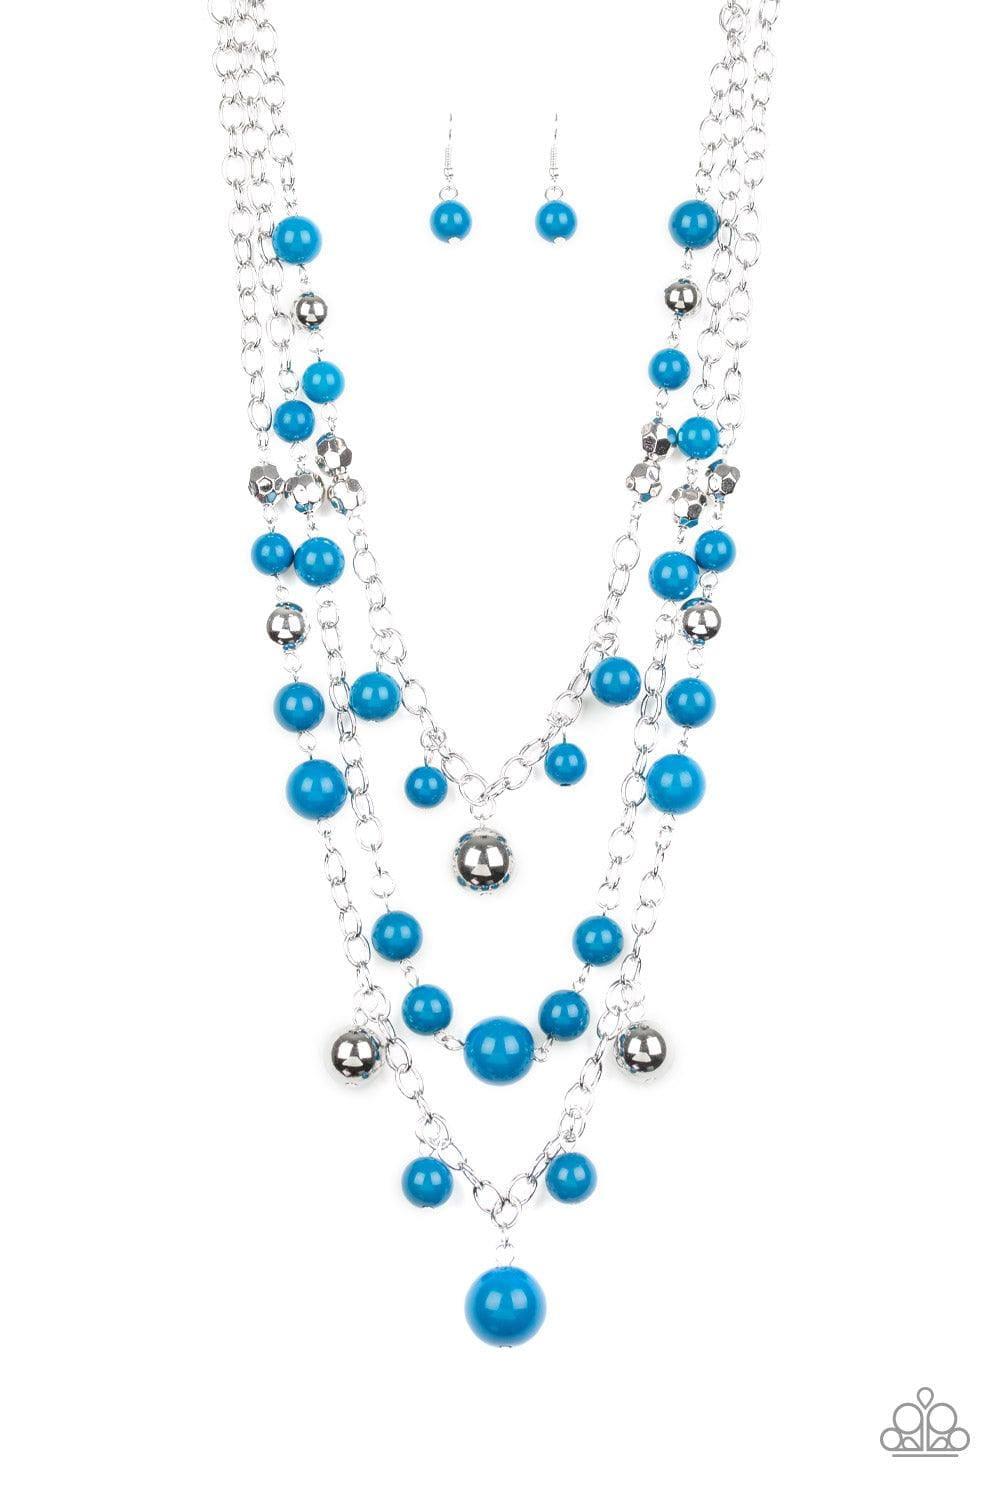 Paparazzi Accessories - The Partygoer - Blue Necklace - Bling by JessieK